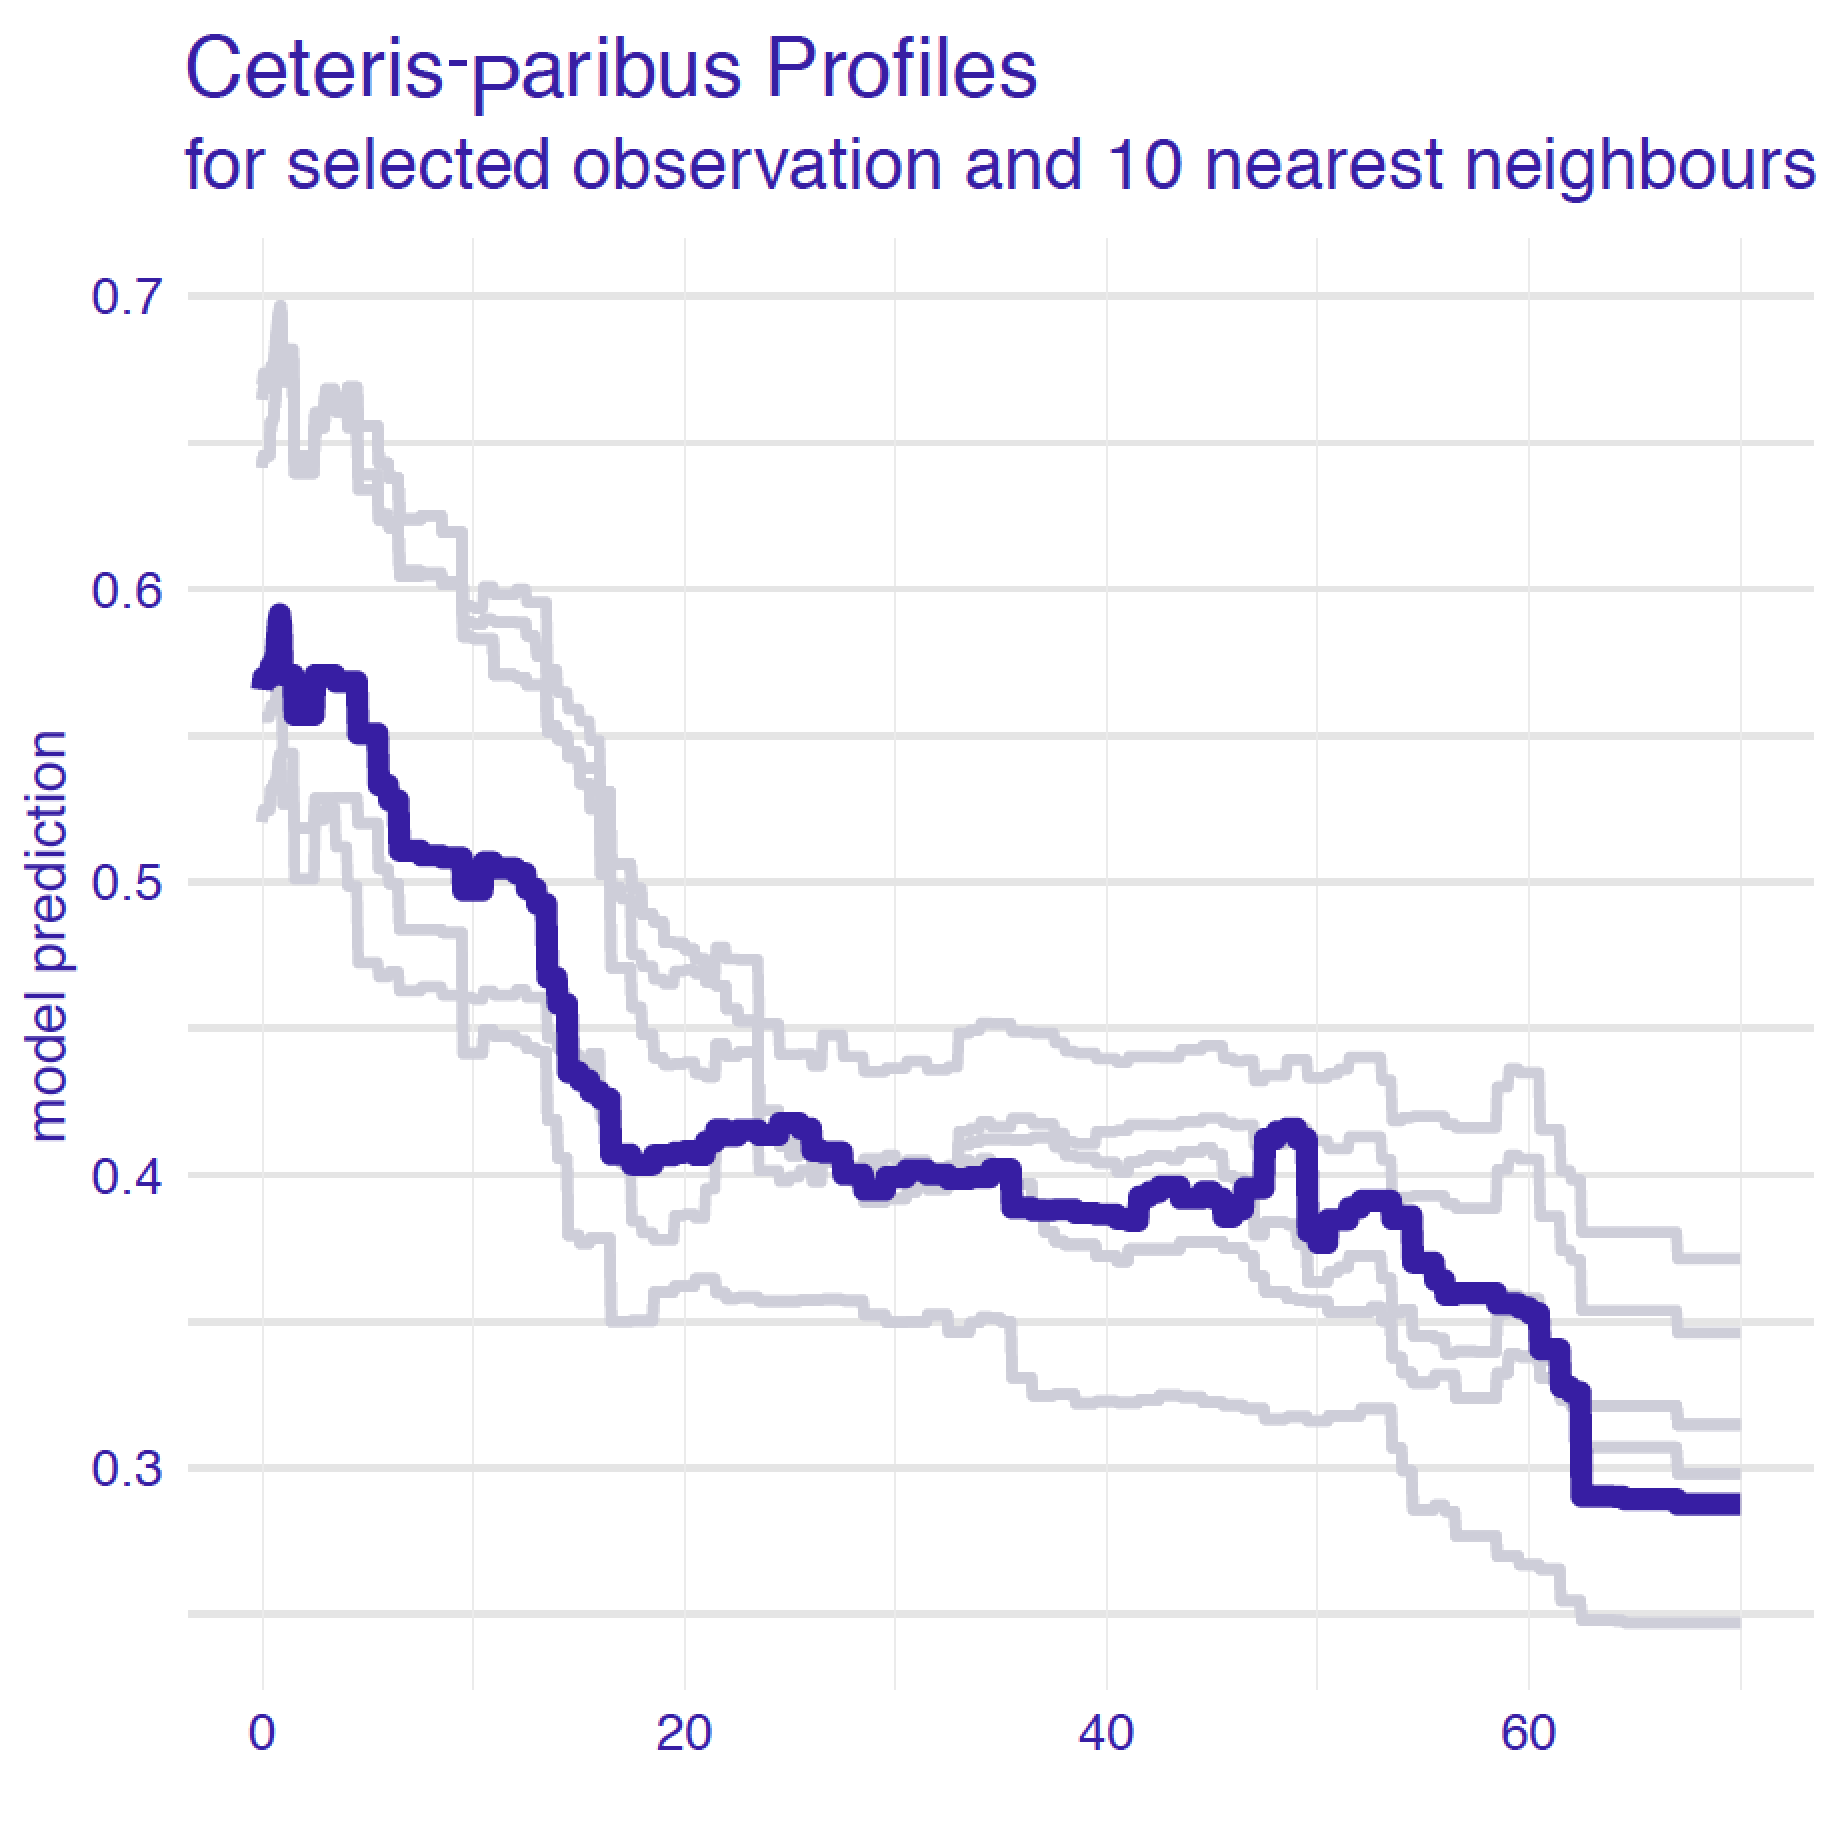 Ceteris-paribus profiles for a selected instance (dark violet line) and 10 nearest neighbours (light grey lines) for the random forest model for the Titanic data. 